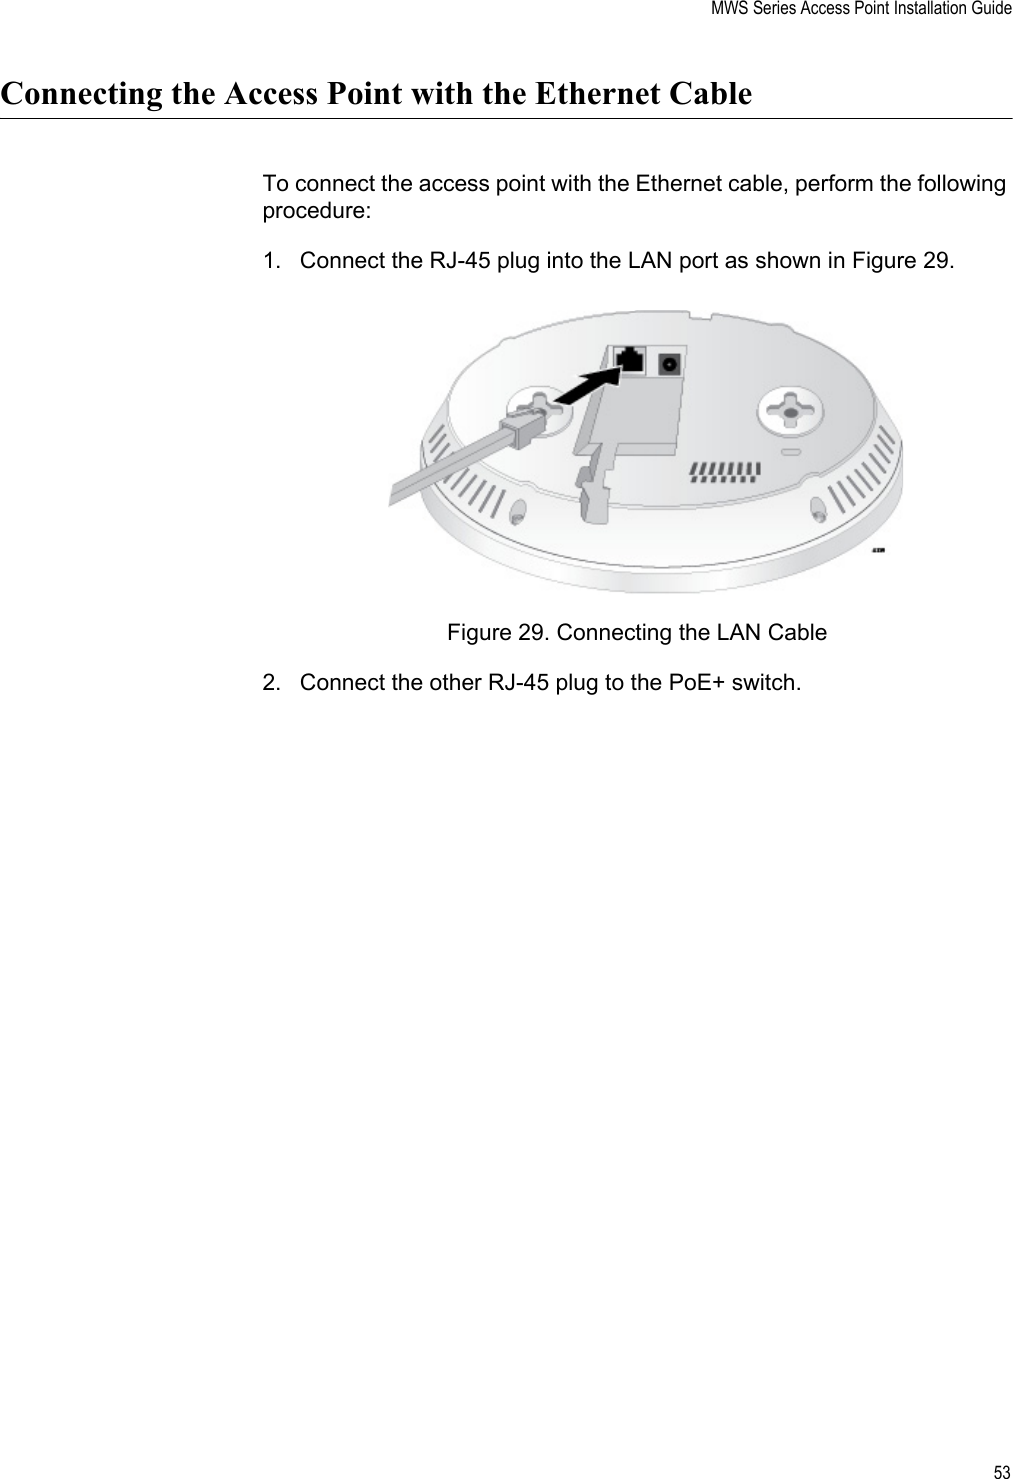 MWS Series Access Point Installation Guide53Connecting the Access Point with the Ethernet CableTo connect the access point with the Ethernet cable, perform the following procedure:1. Connect the RJ-45 plug into the LAN port as shown in Figure 29.Figure 29. Connecting the LAN Cable2. Connect the other RJ-45 plug to the PoE+ switch.